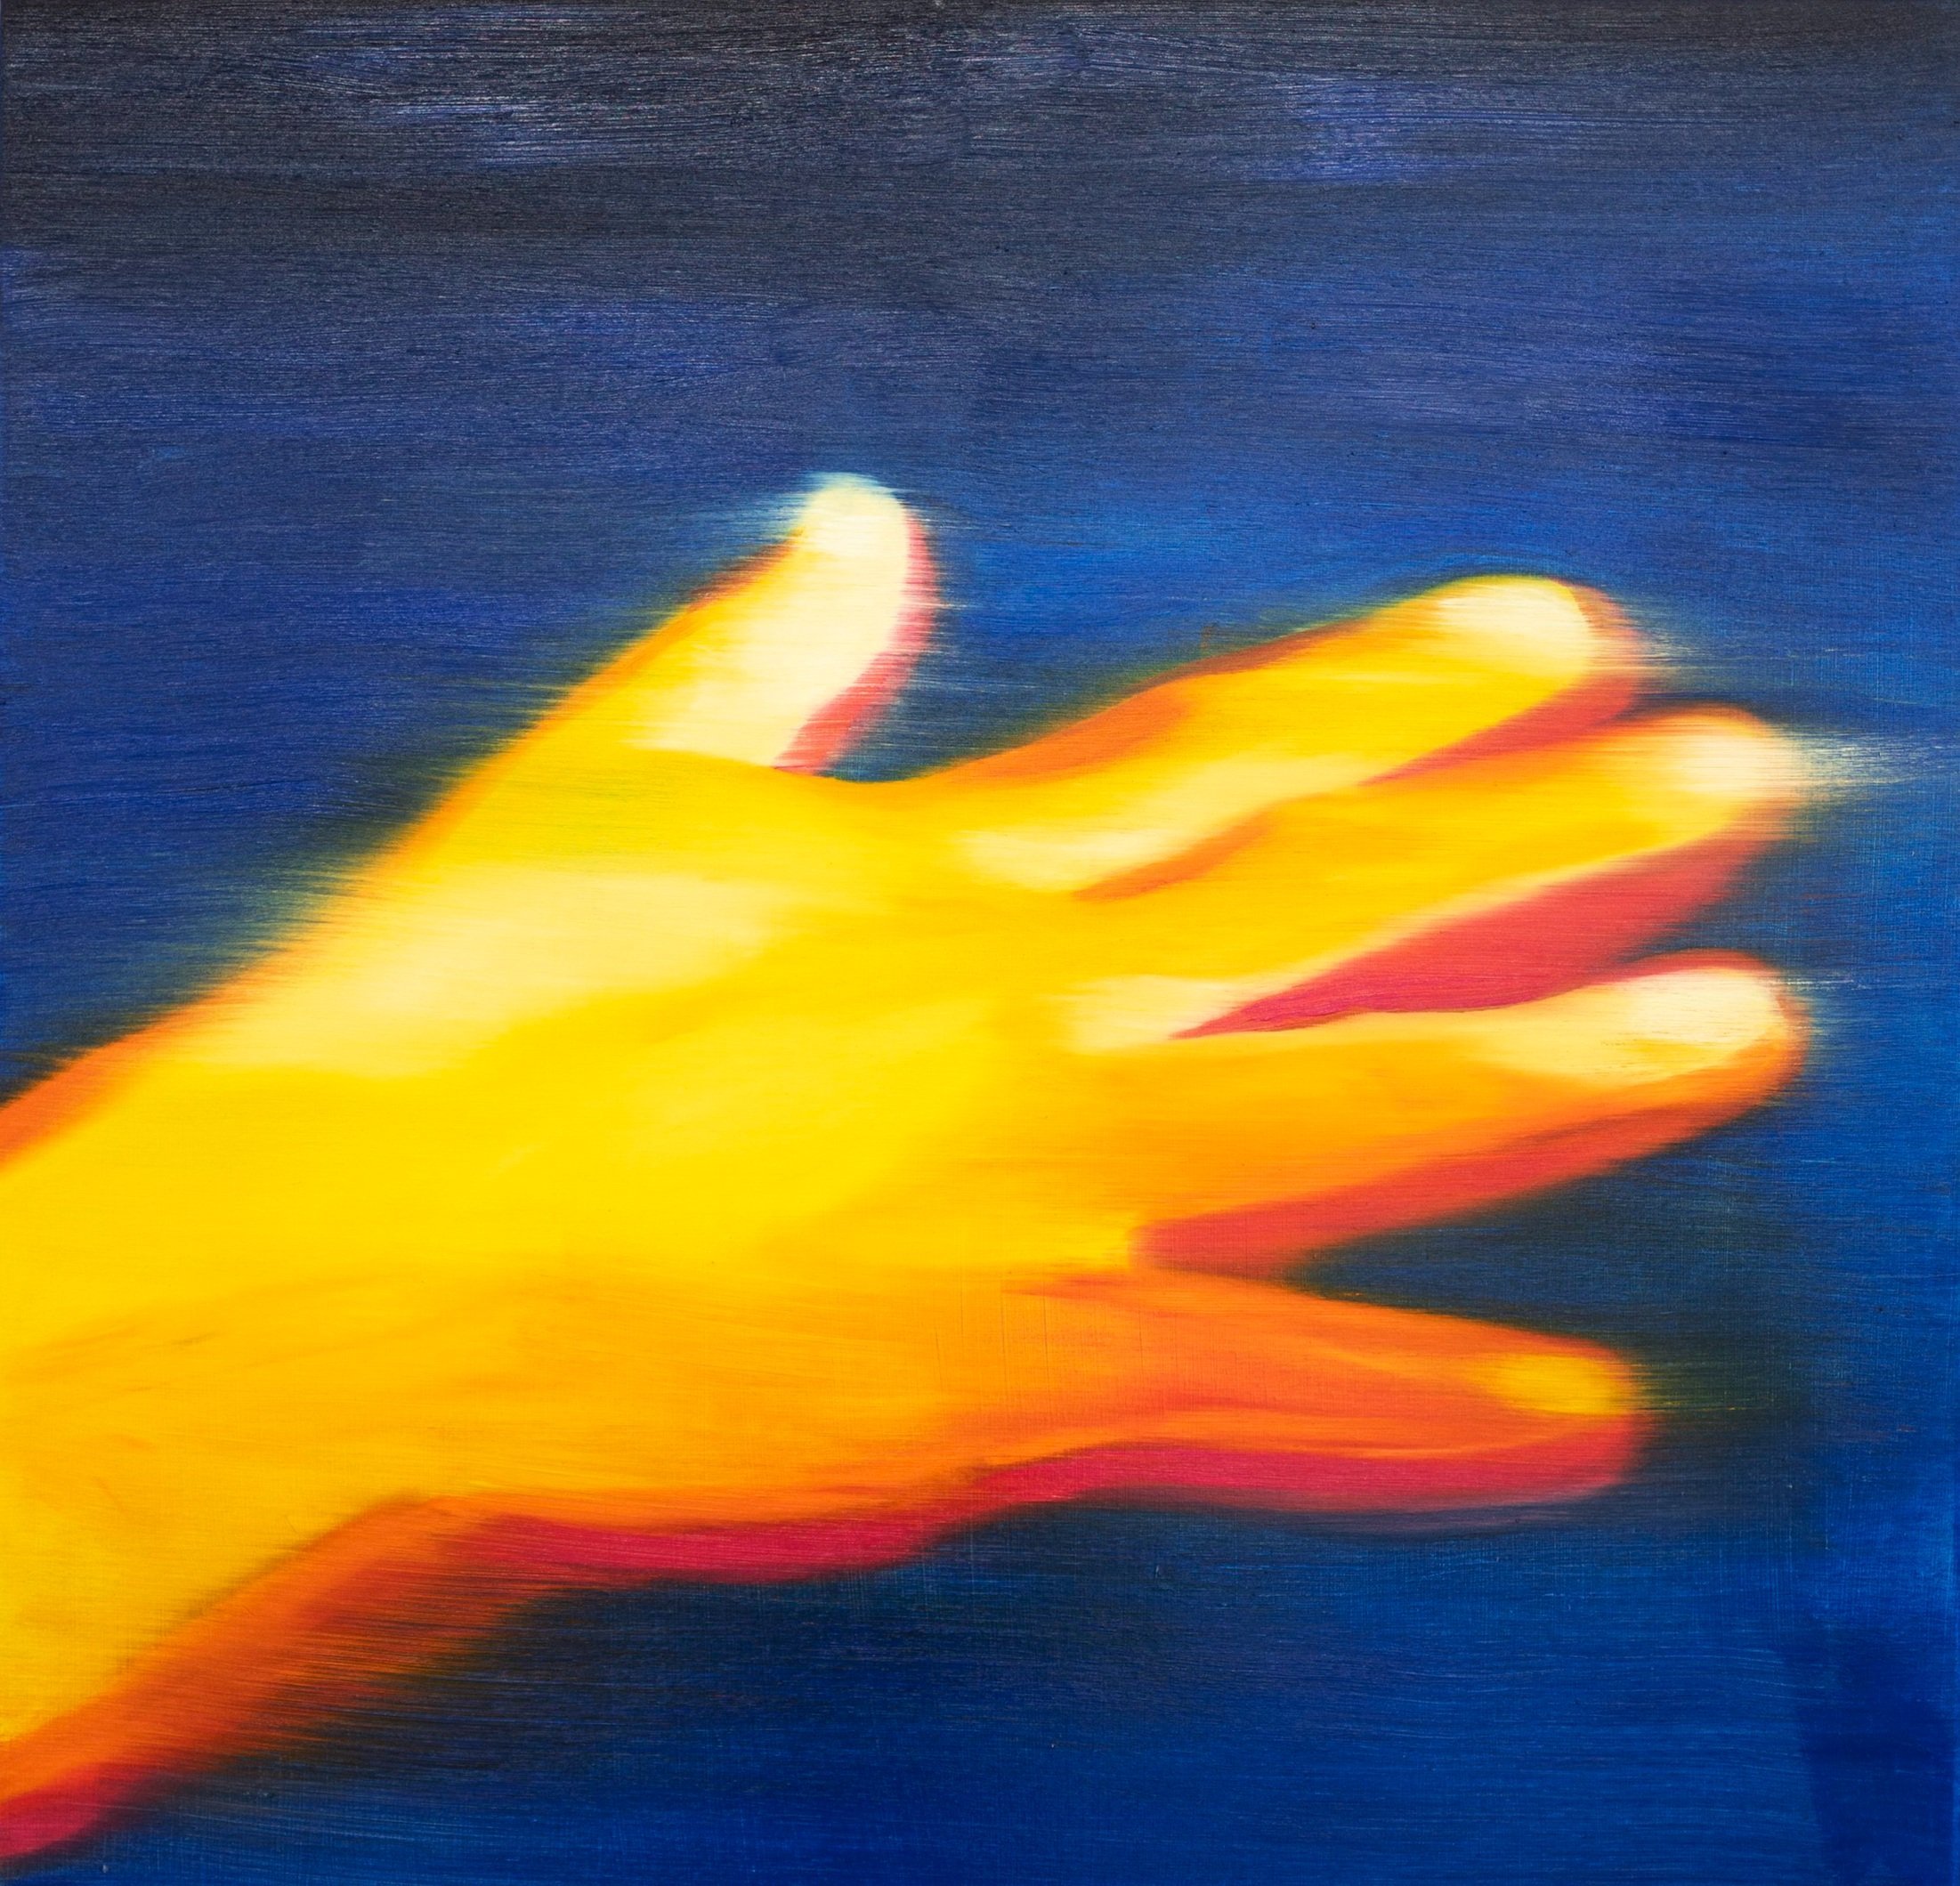   Touch , 2022  Oil on linen   76 x 76 cm (30 x 30 in)  